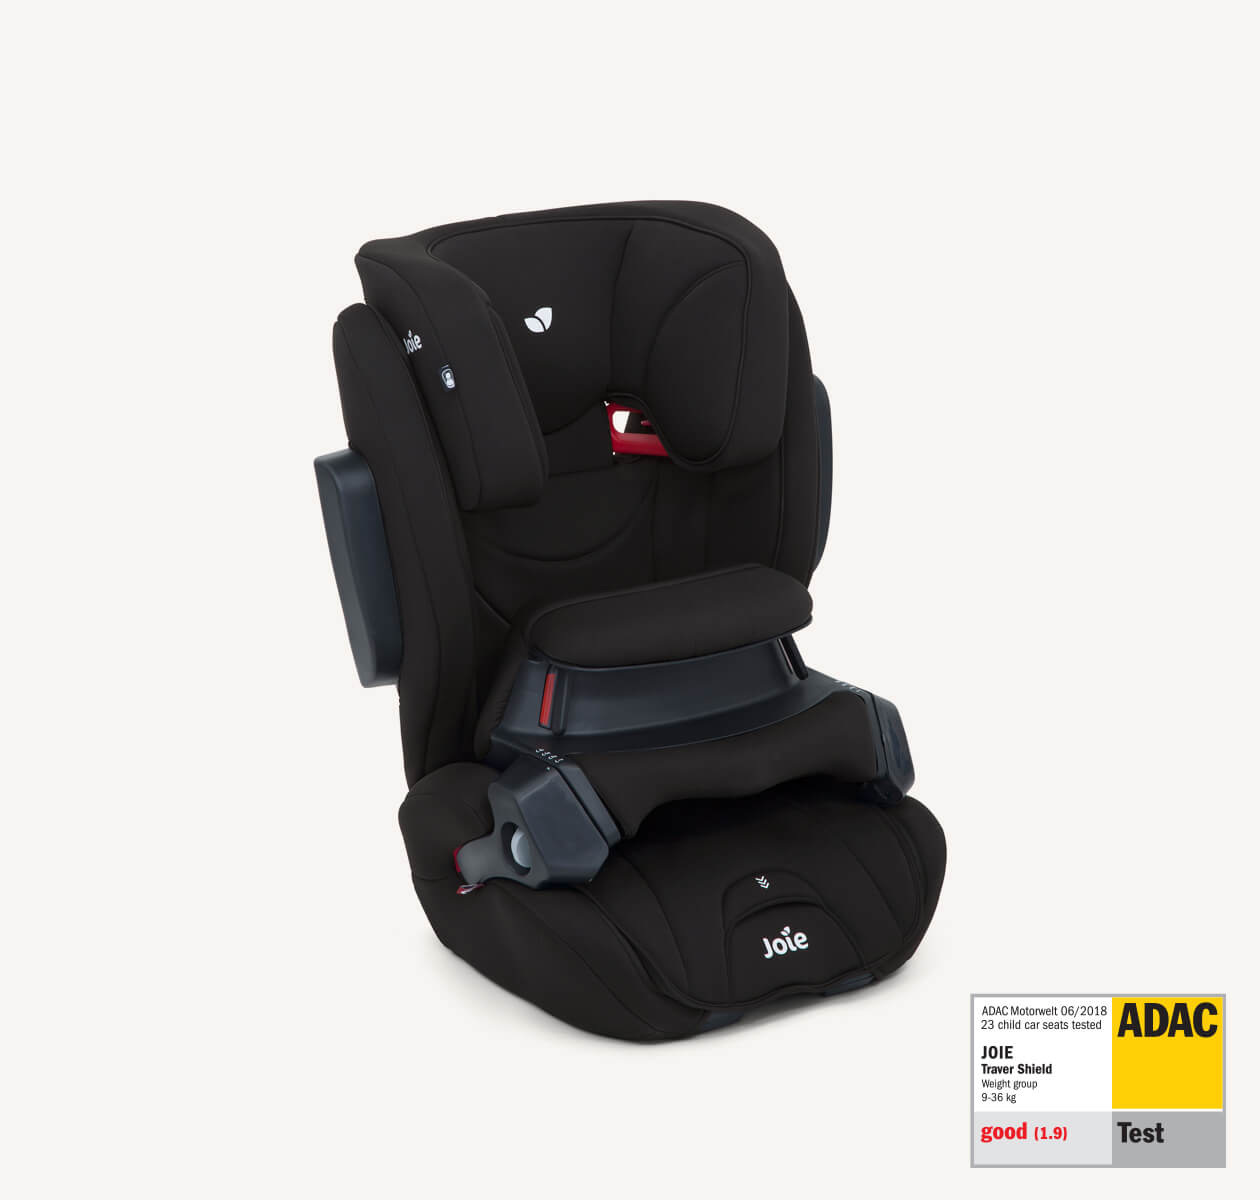  Joie traver shield booster car seat in black positioned at a right angle, with the ADAC test label in the lower right corner.